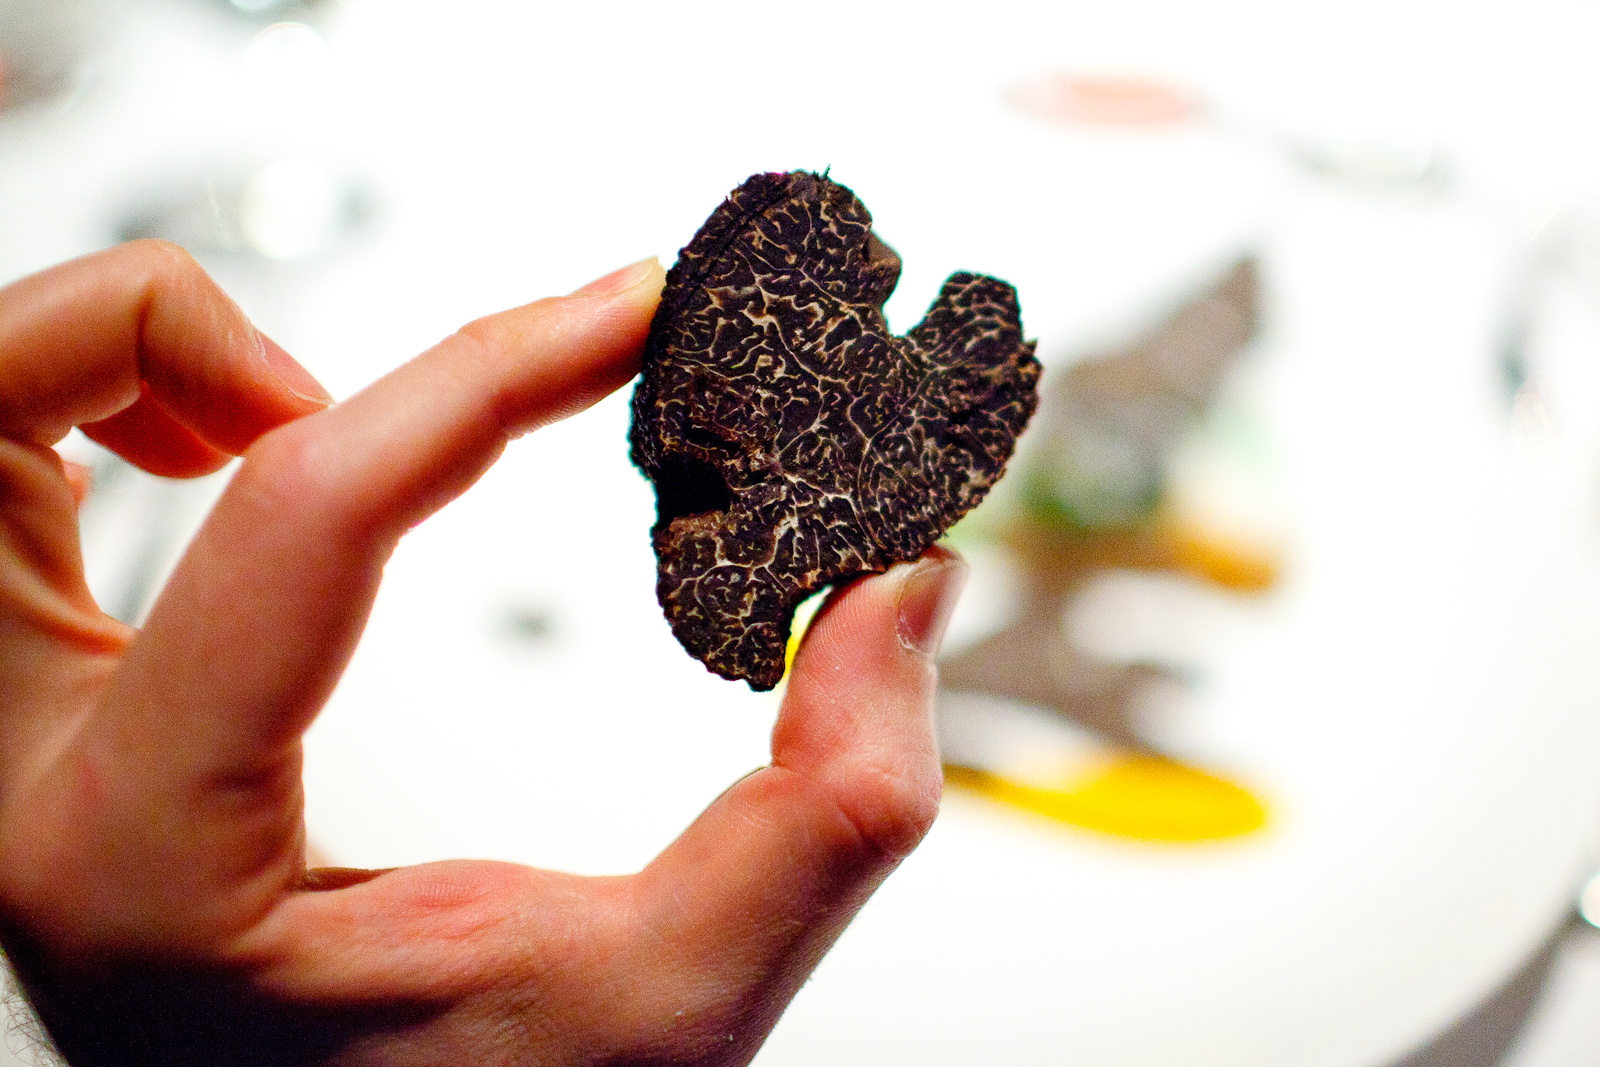 American Perigord-style black truffle, from just outside Knoxville Tennessee